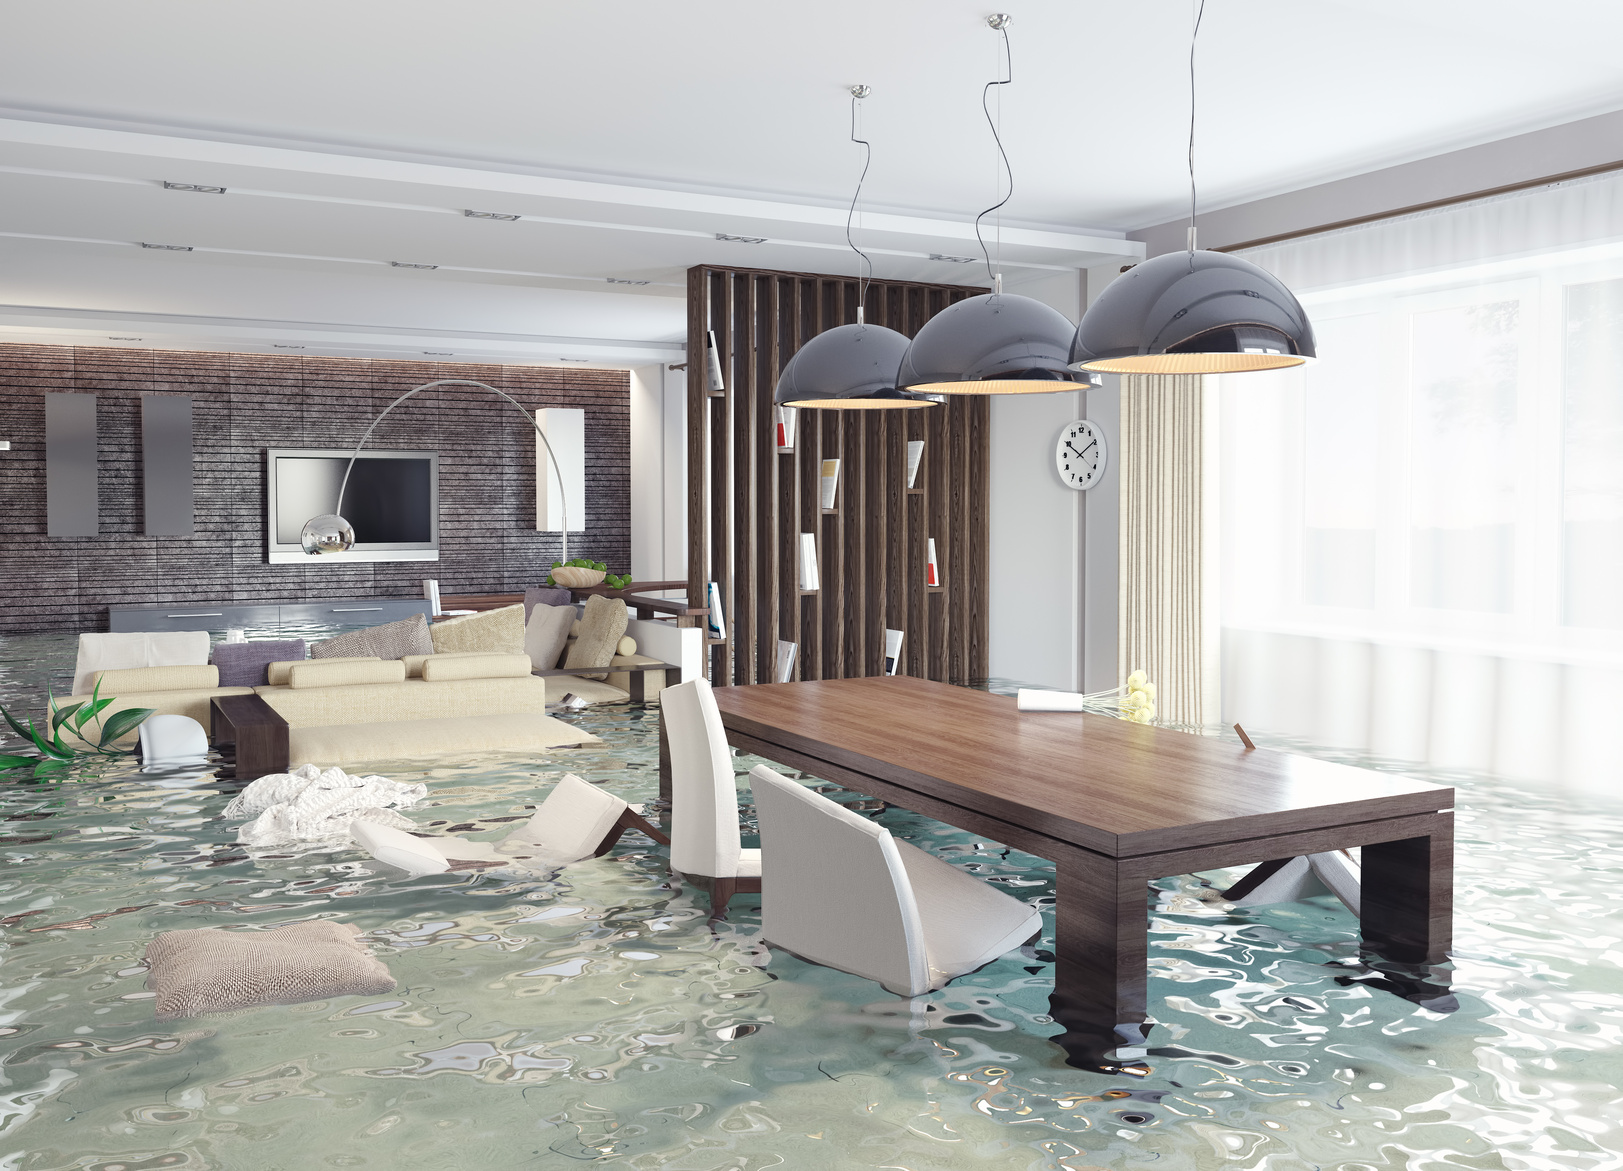 Flooded living/dining room in home for blog "Flood Damage Repair Costs"